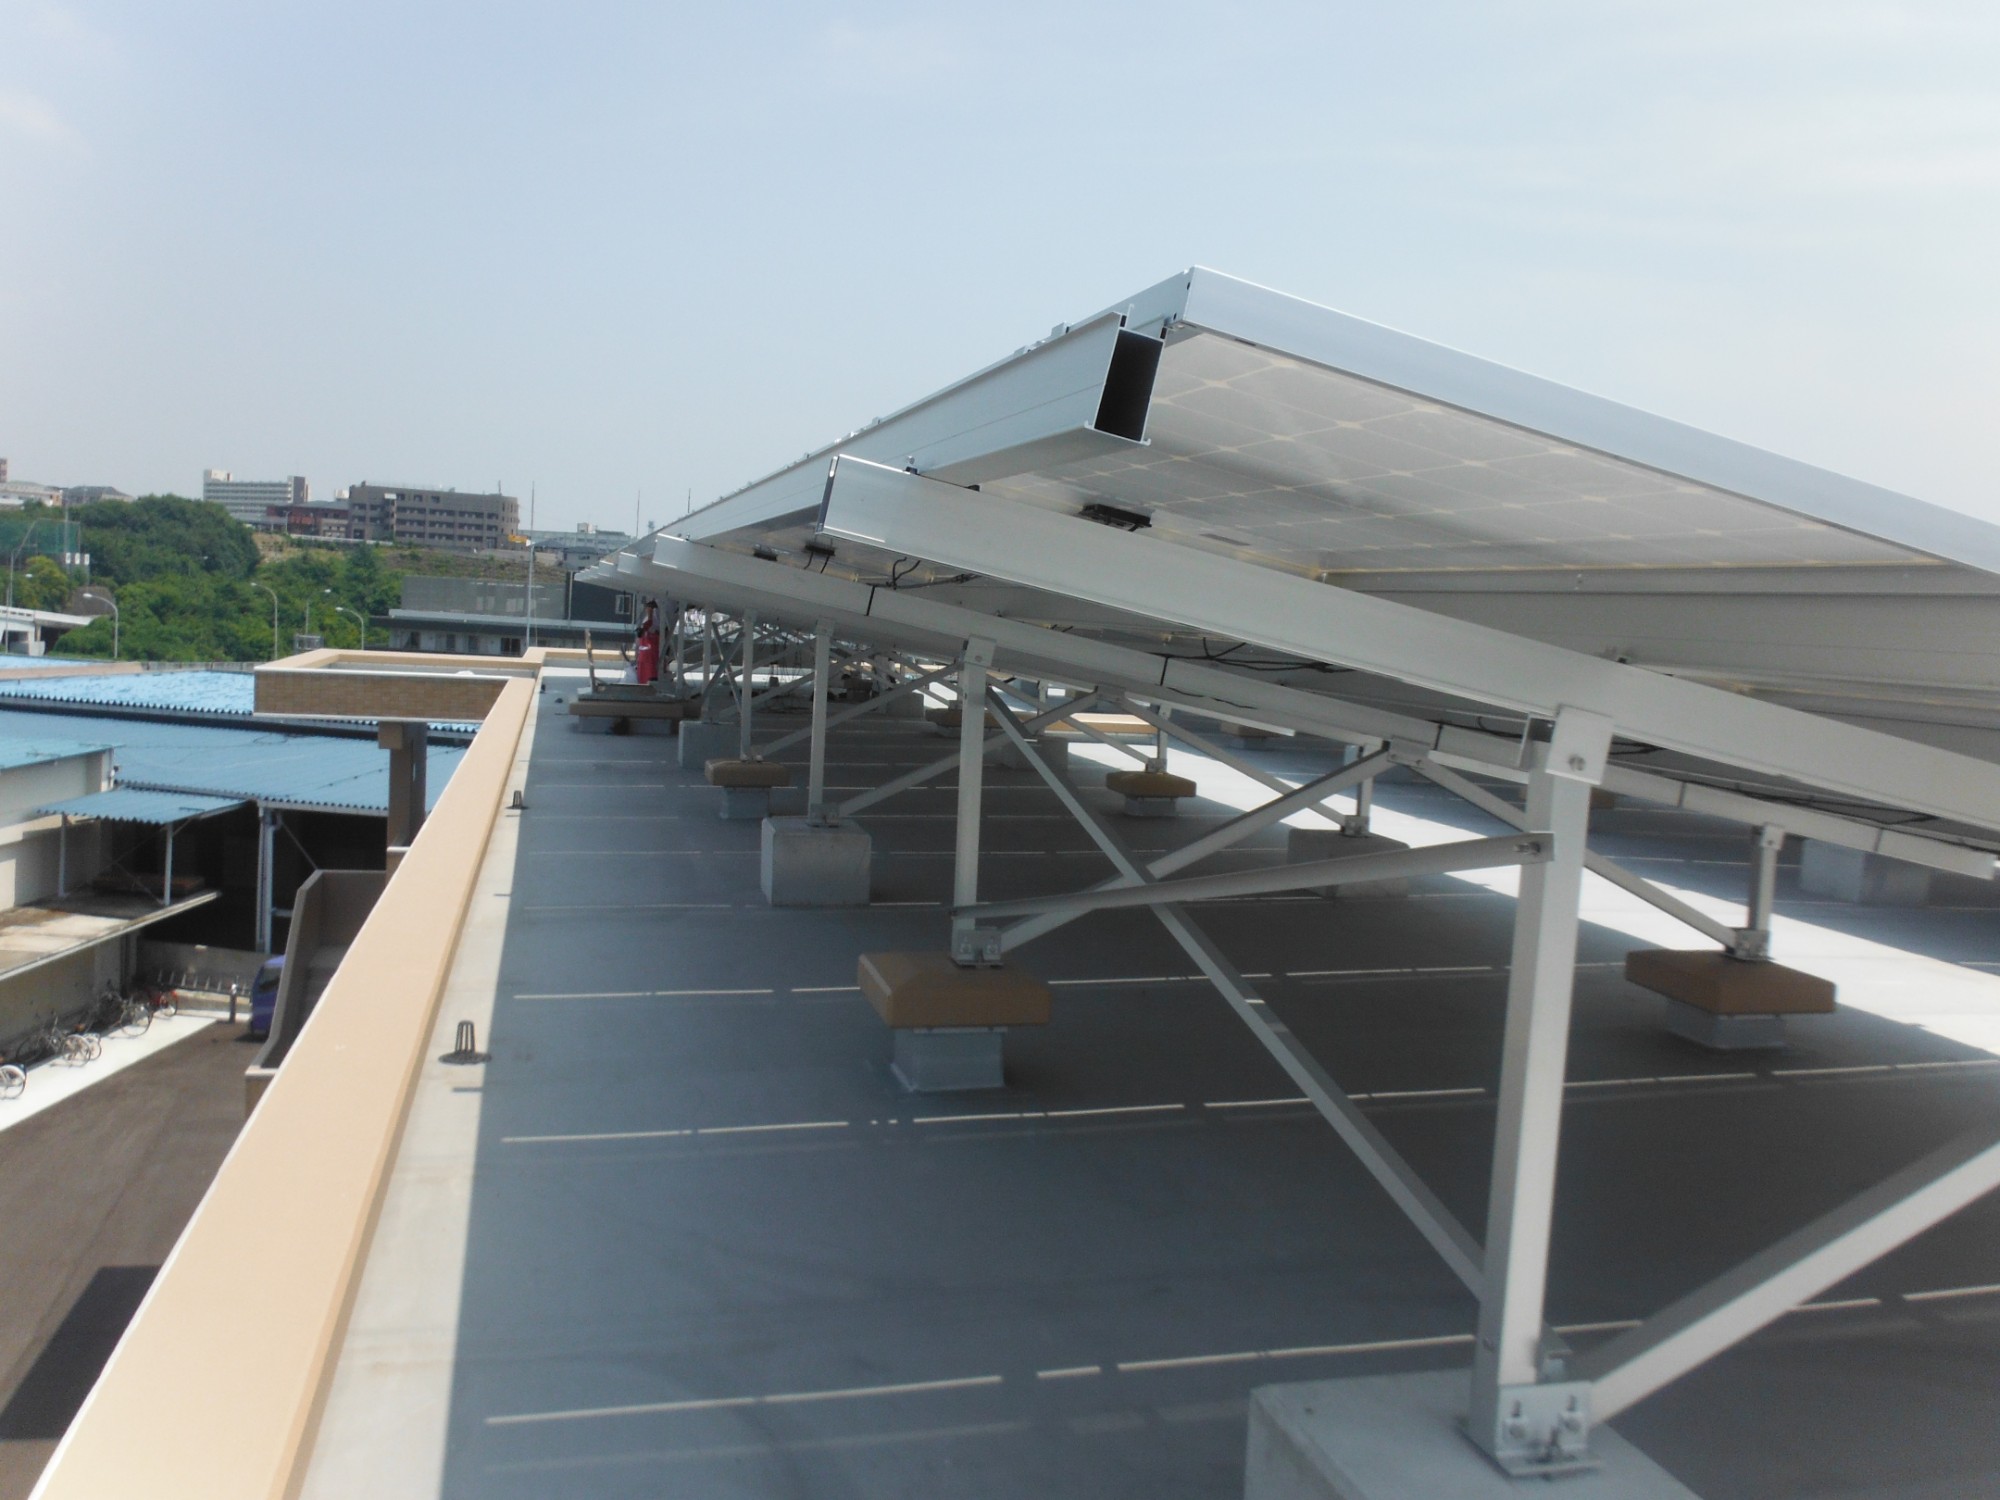 Flat Roof Solar Racking System Manufacturers, Flat Roof Solar Racking System Factory, Supply Flat Roof Solar Racking System